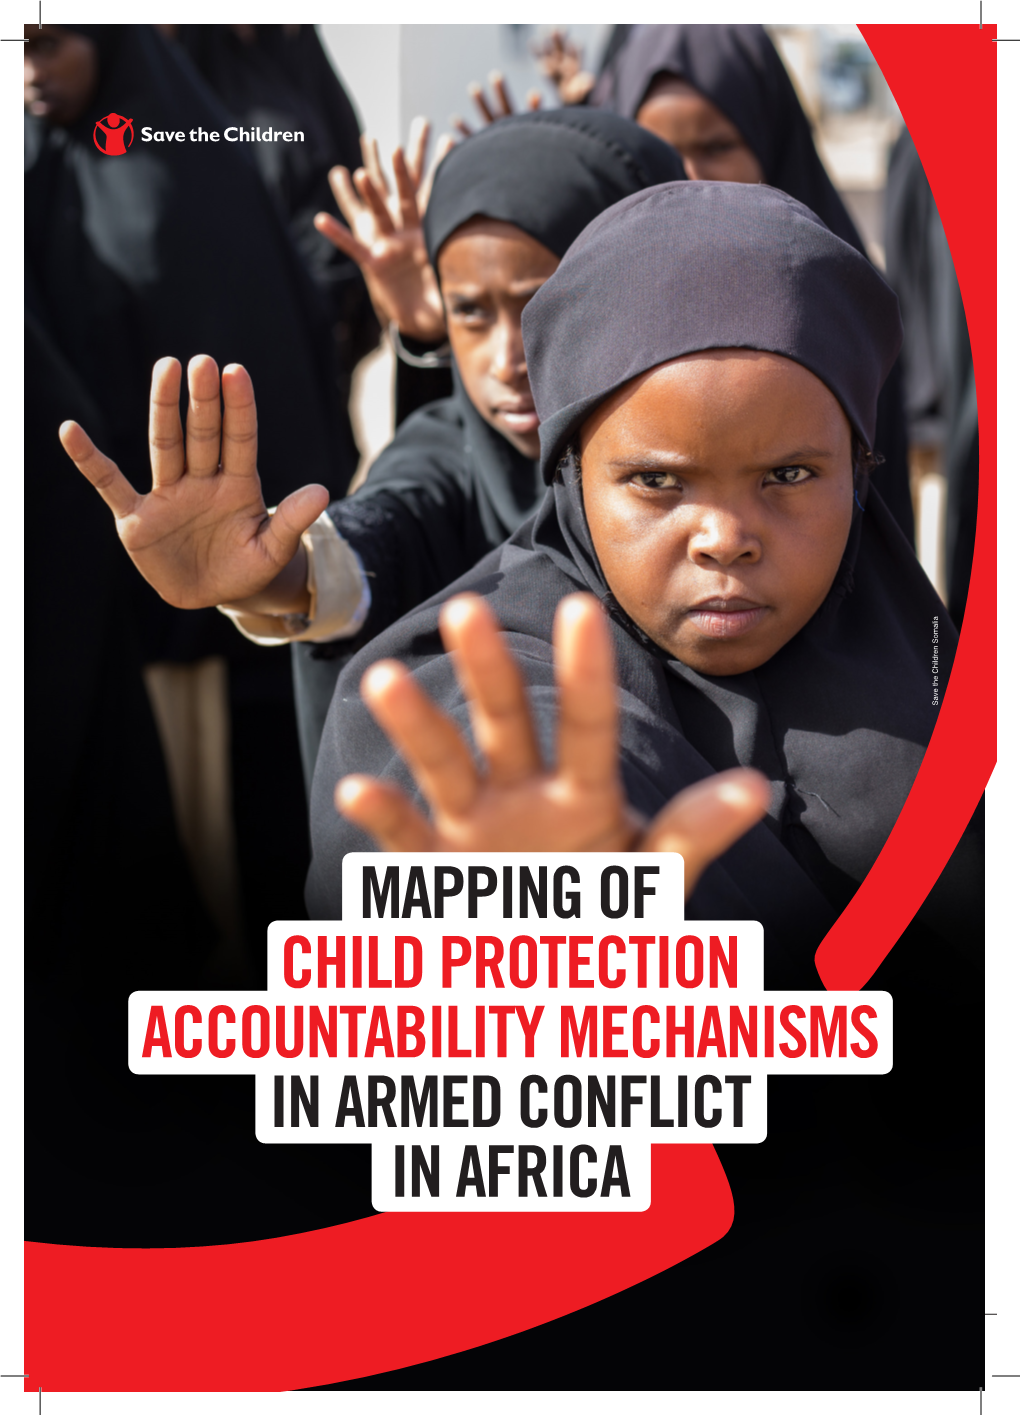 Mapping of Child Protection Accountability Mechanisms in Armed Conflict in Africa